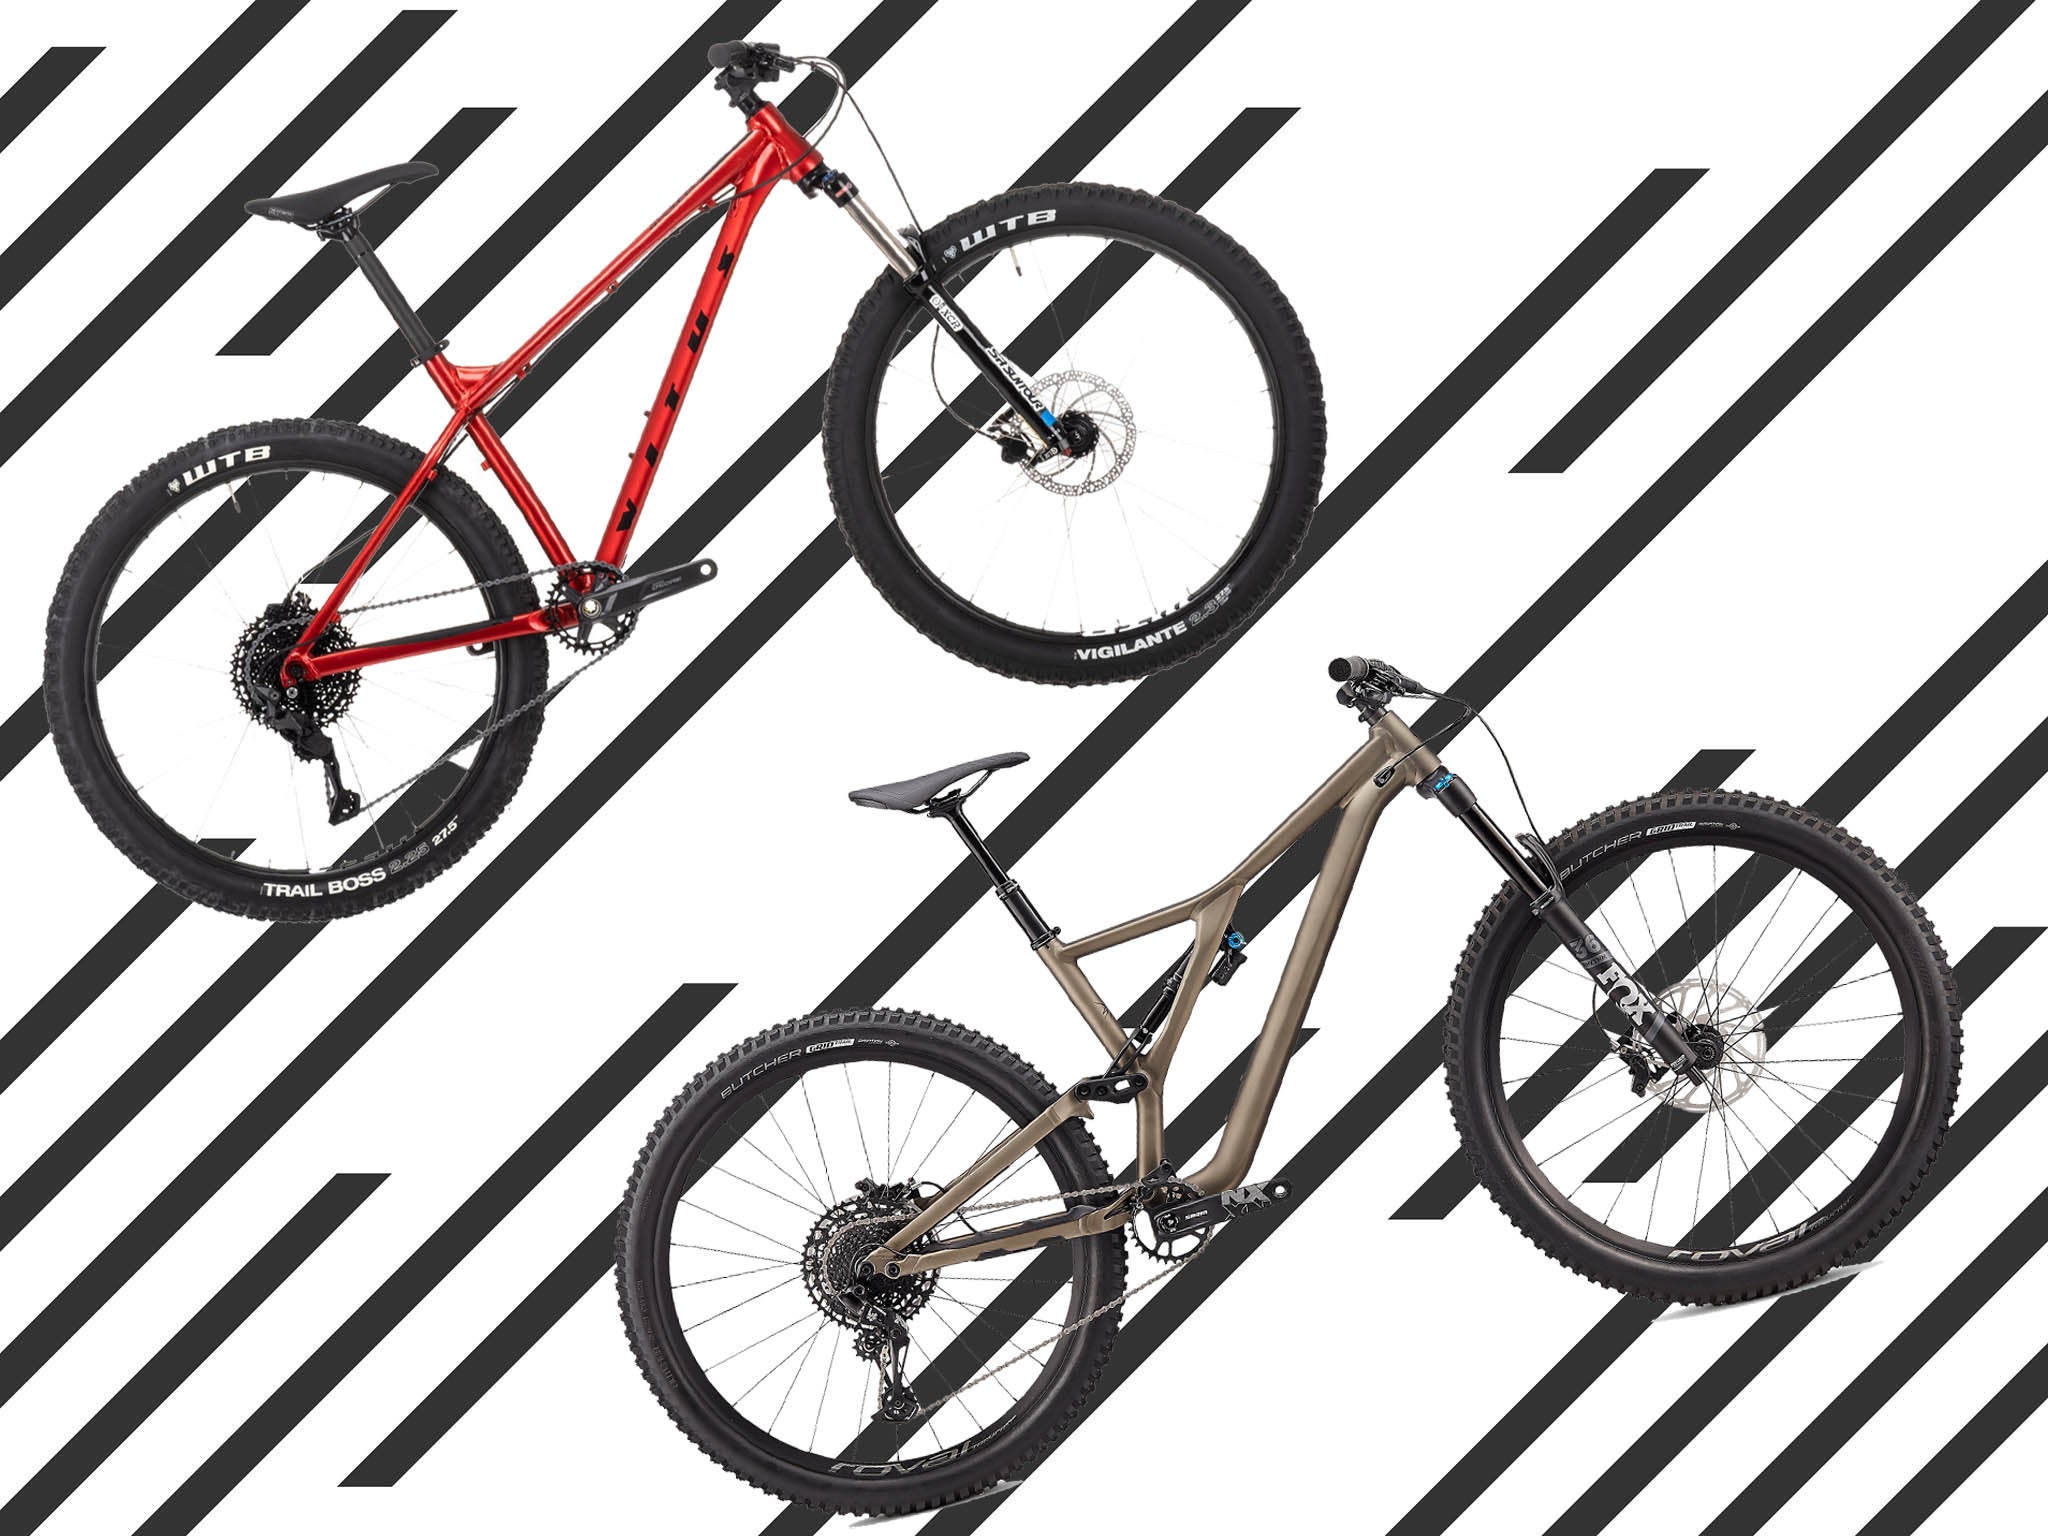 8 best trail bikes 2020: Hardtail and full-suspension models